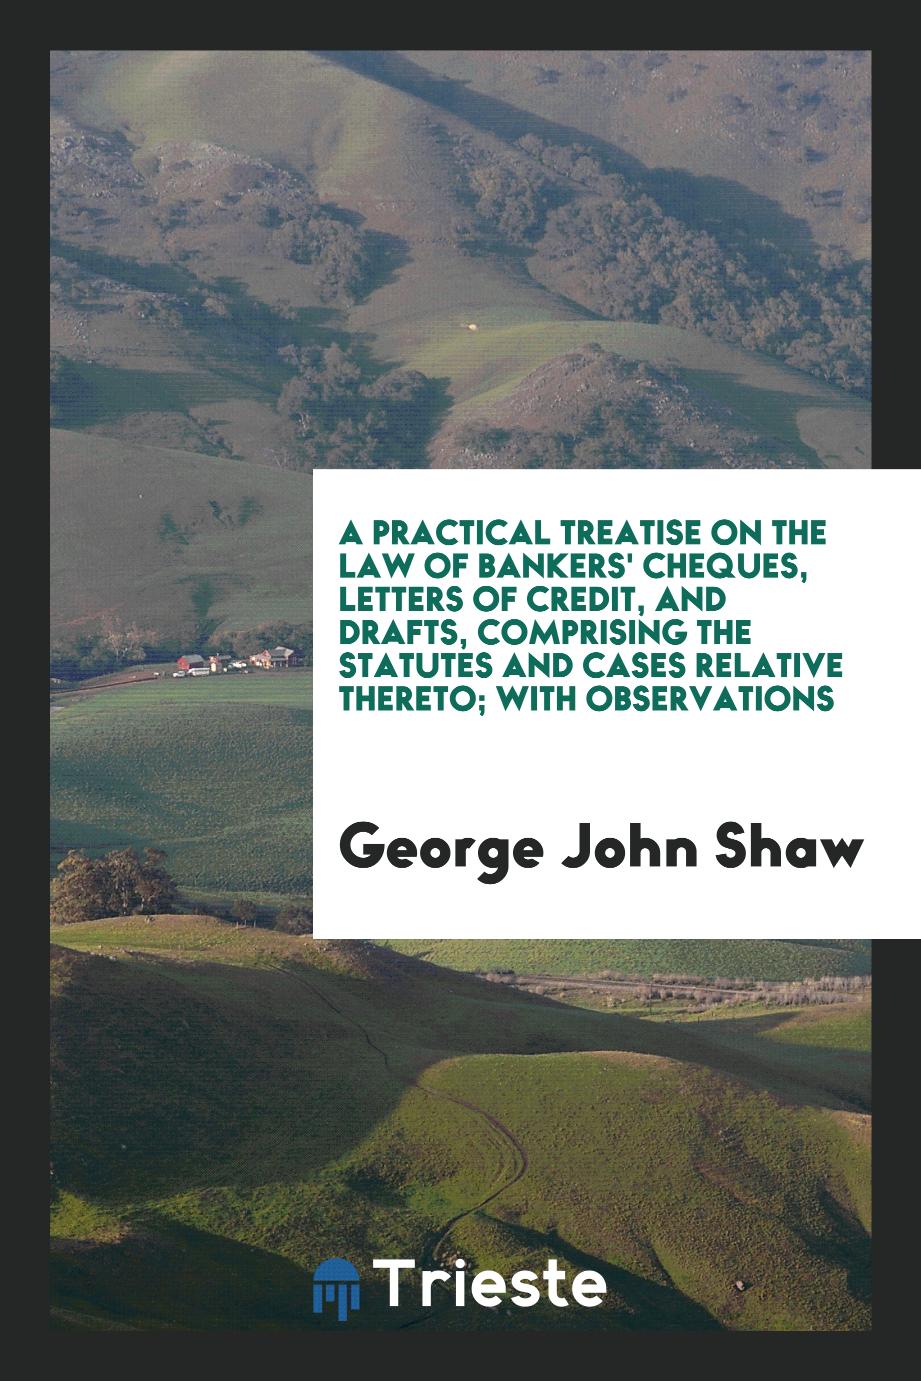 A Practical Treatise on the Law of Bankers' Cheques, Letters of Credit, and Drafts, Comprising the Statutes and Cases Relative Thereto; With Observations